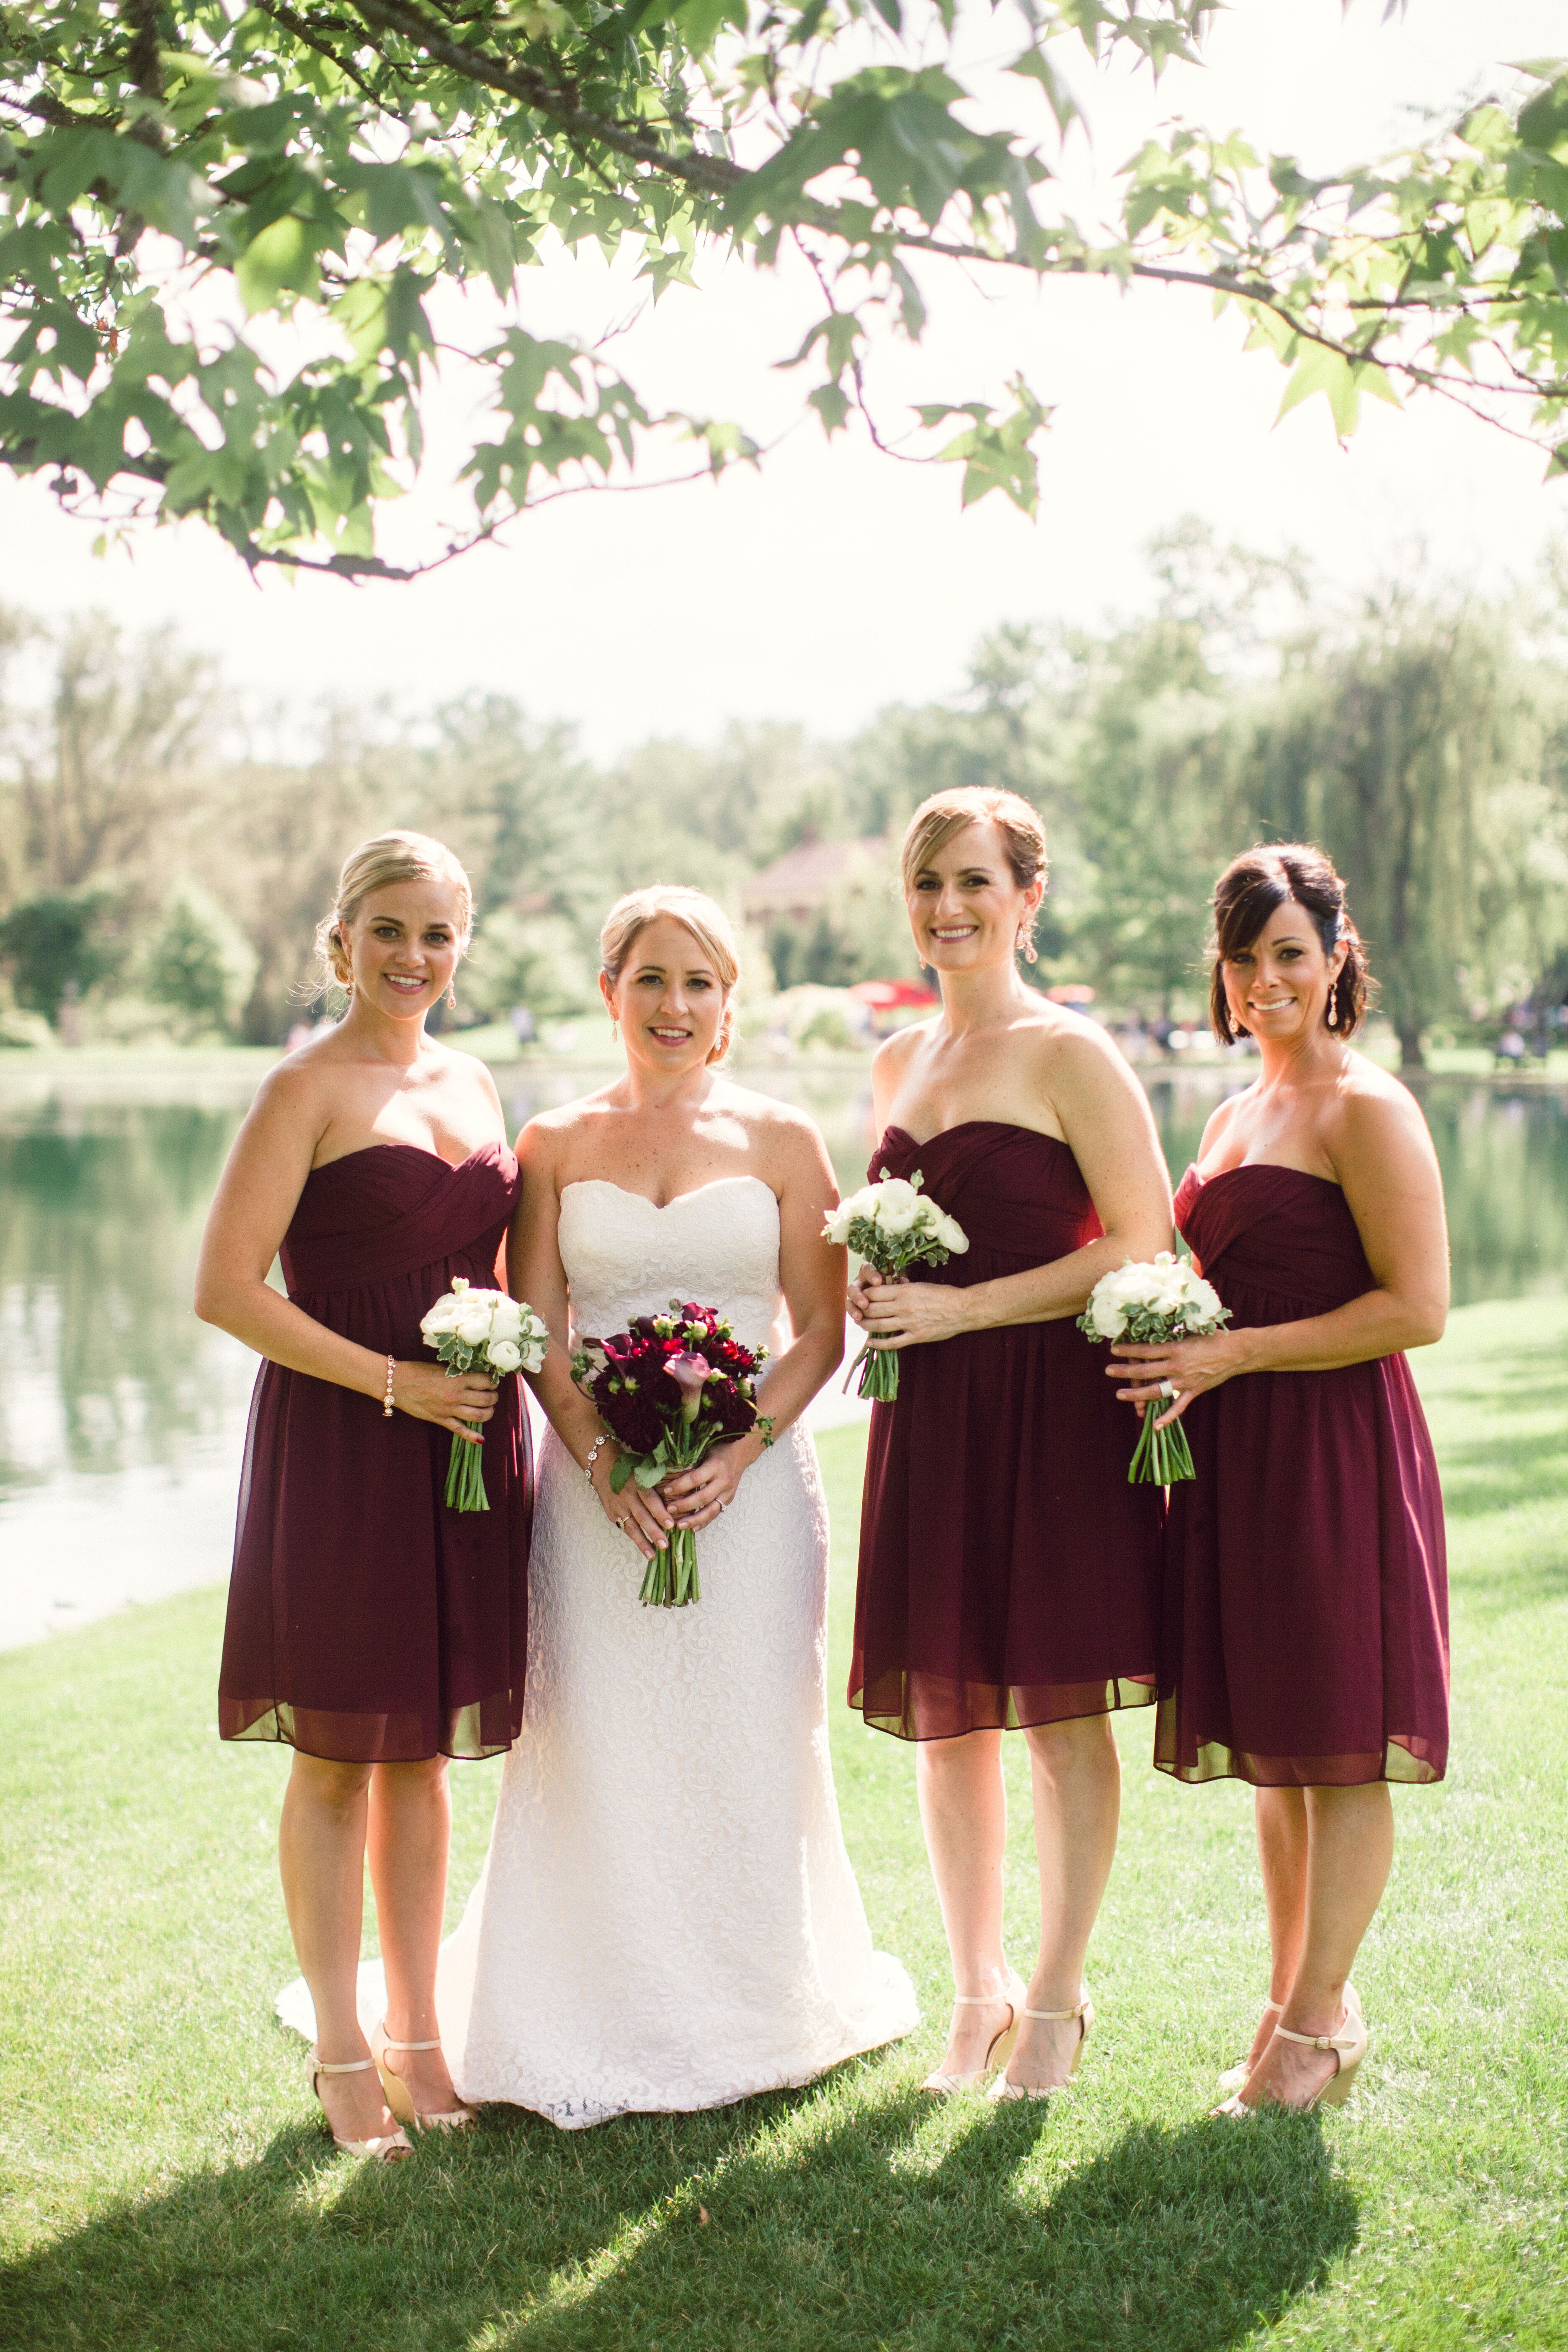 Wine Bridesmaid Dresses with Matching Bouquets